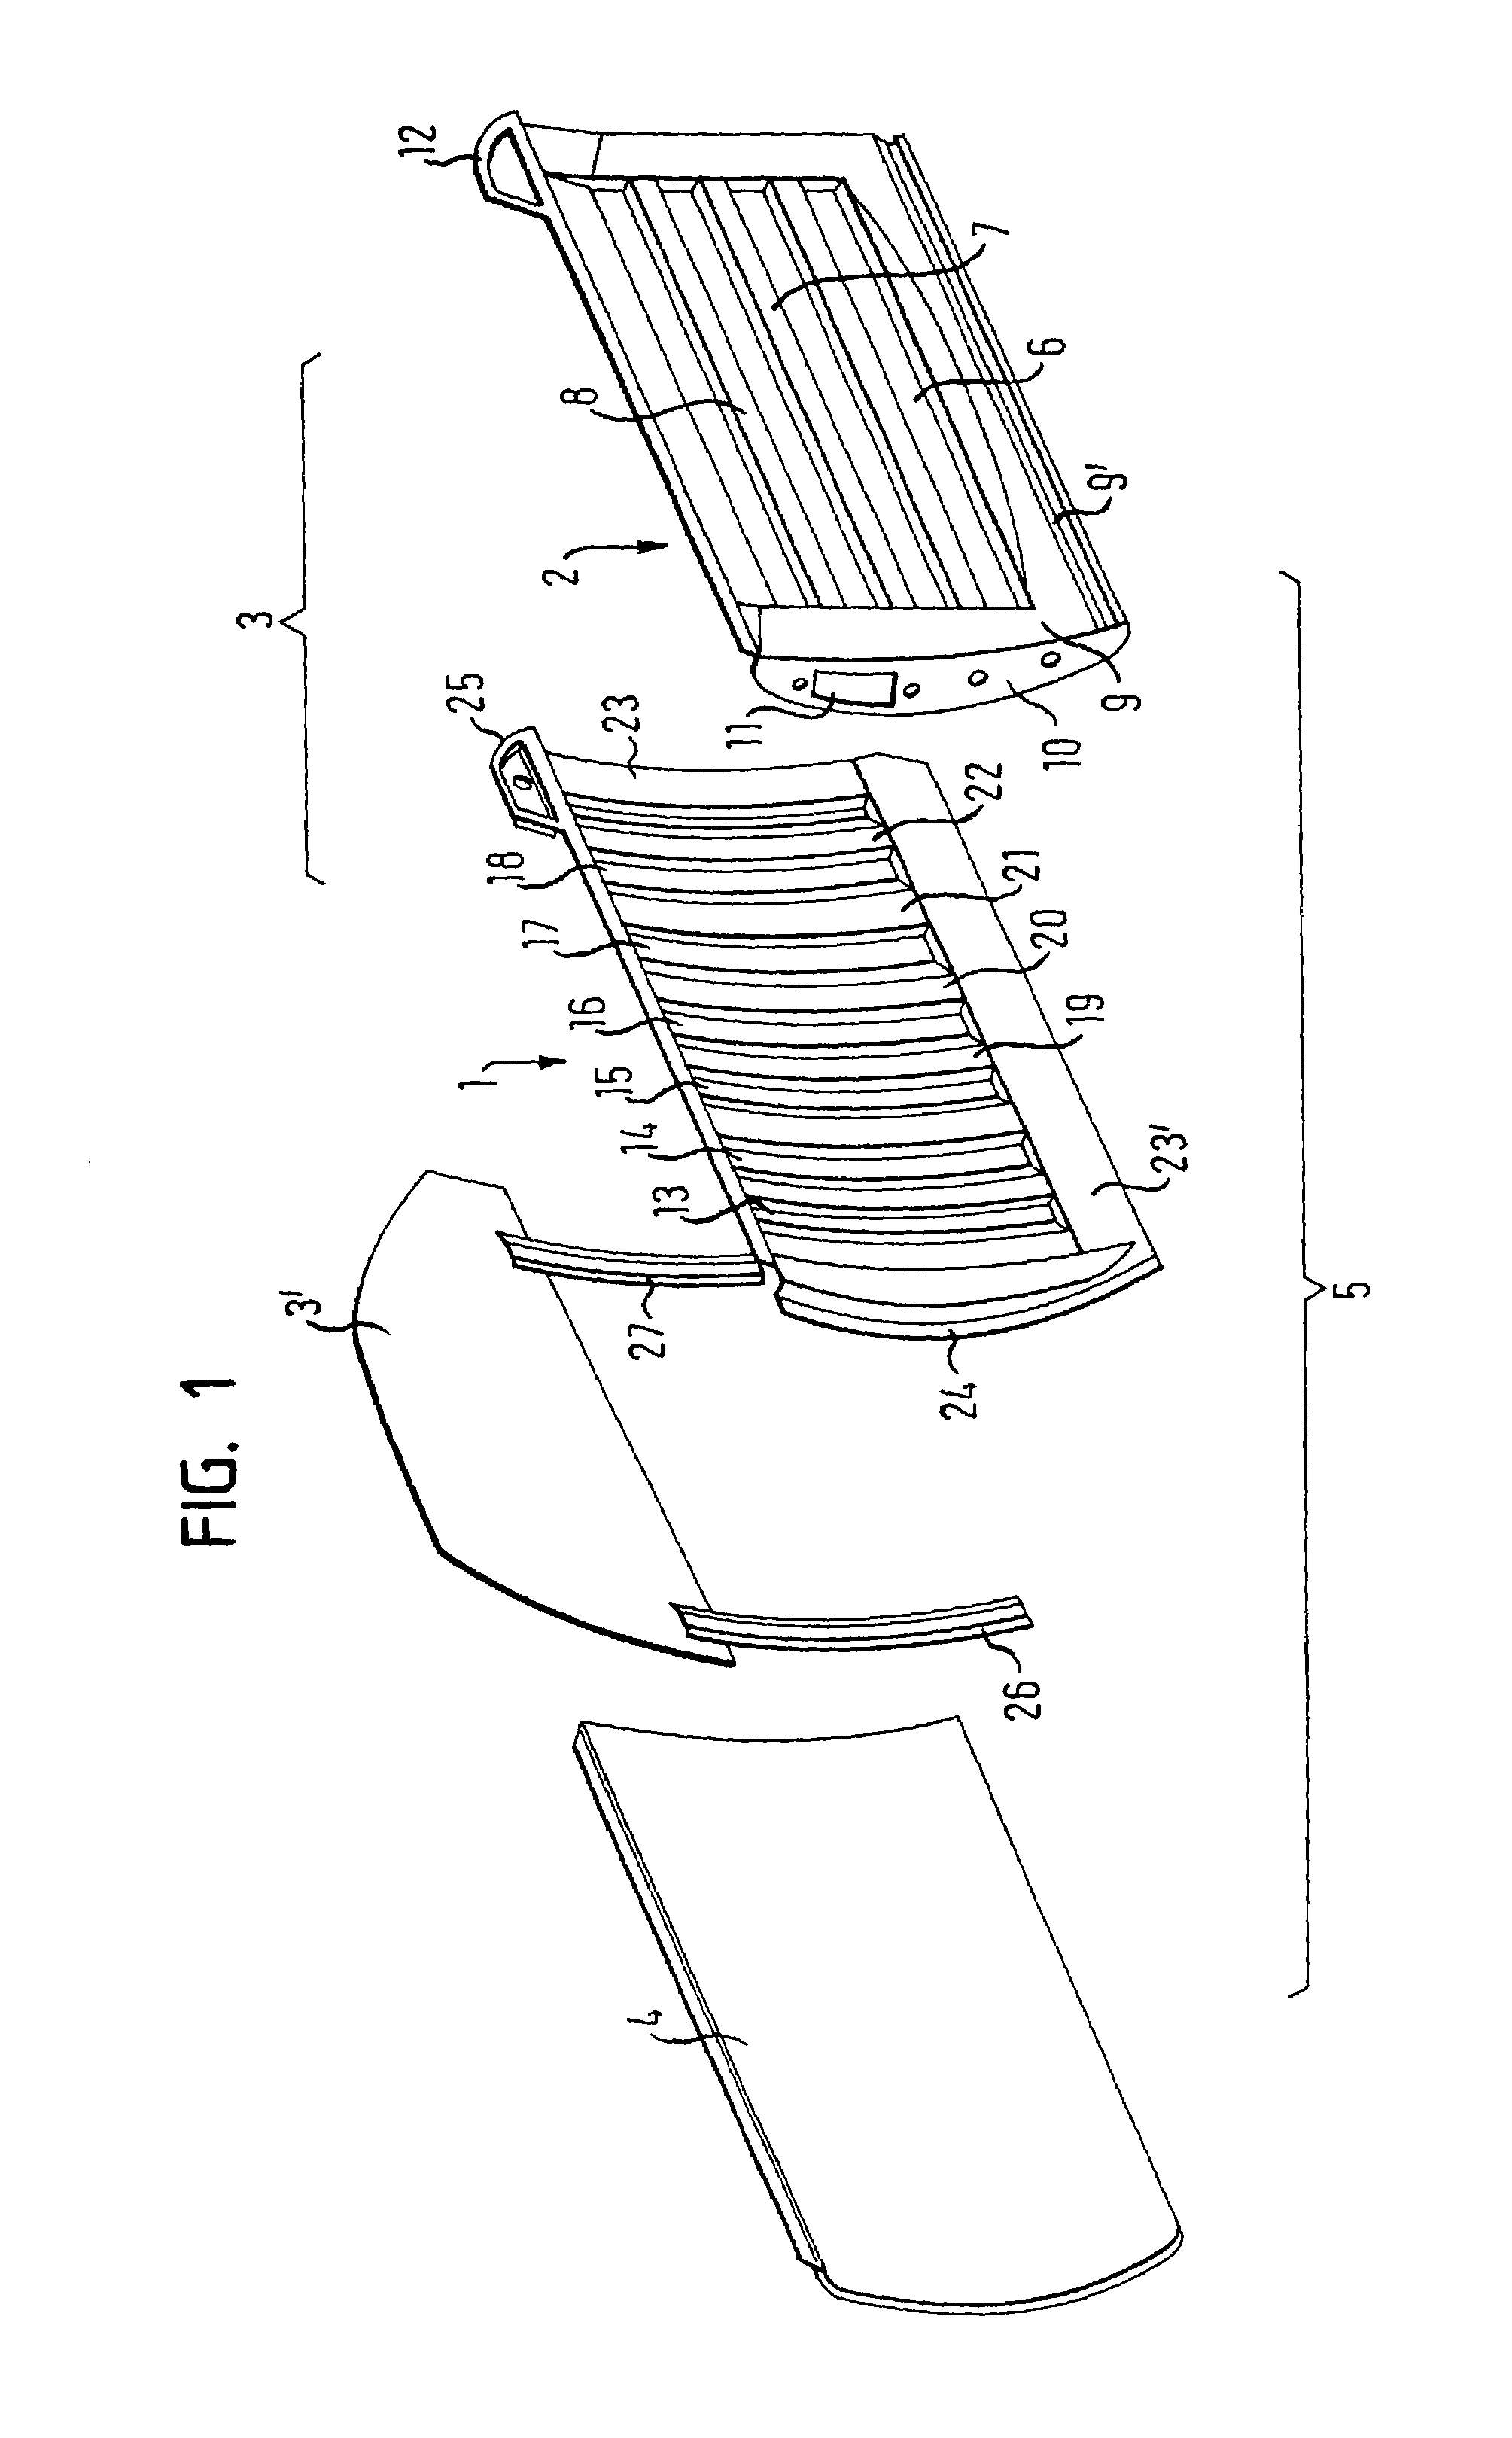 Curved vehicle door having a function carrier providing side impact protection